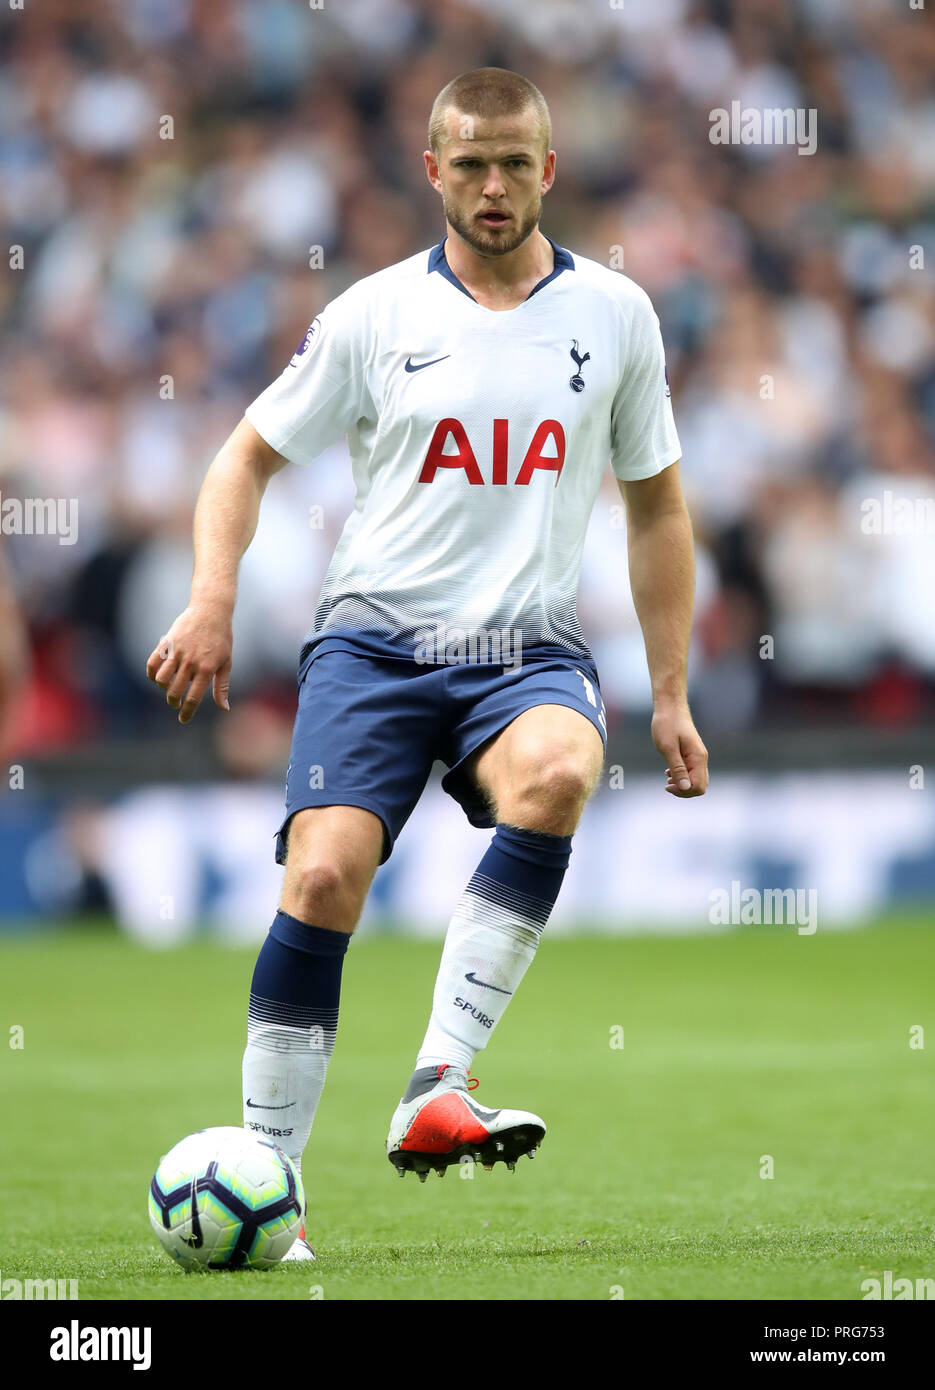 05.11.2015. White Hart Lane, Tottenham, London, England, UEFA Europa League  Football. Tottenham Hotspur versus Anderlecht. Tottenham Hotspur's Eric  Dier who today was called up to the senior England squad warms up before